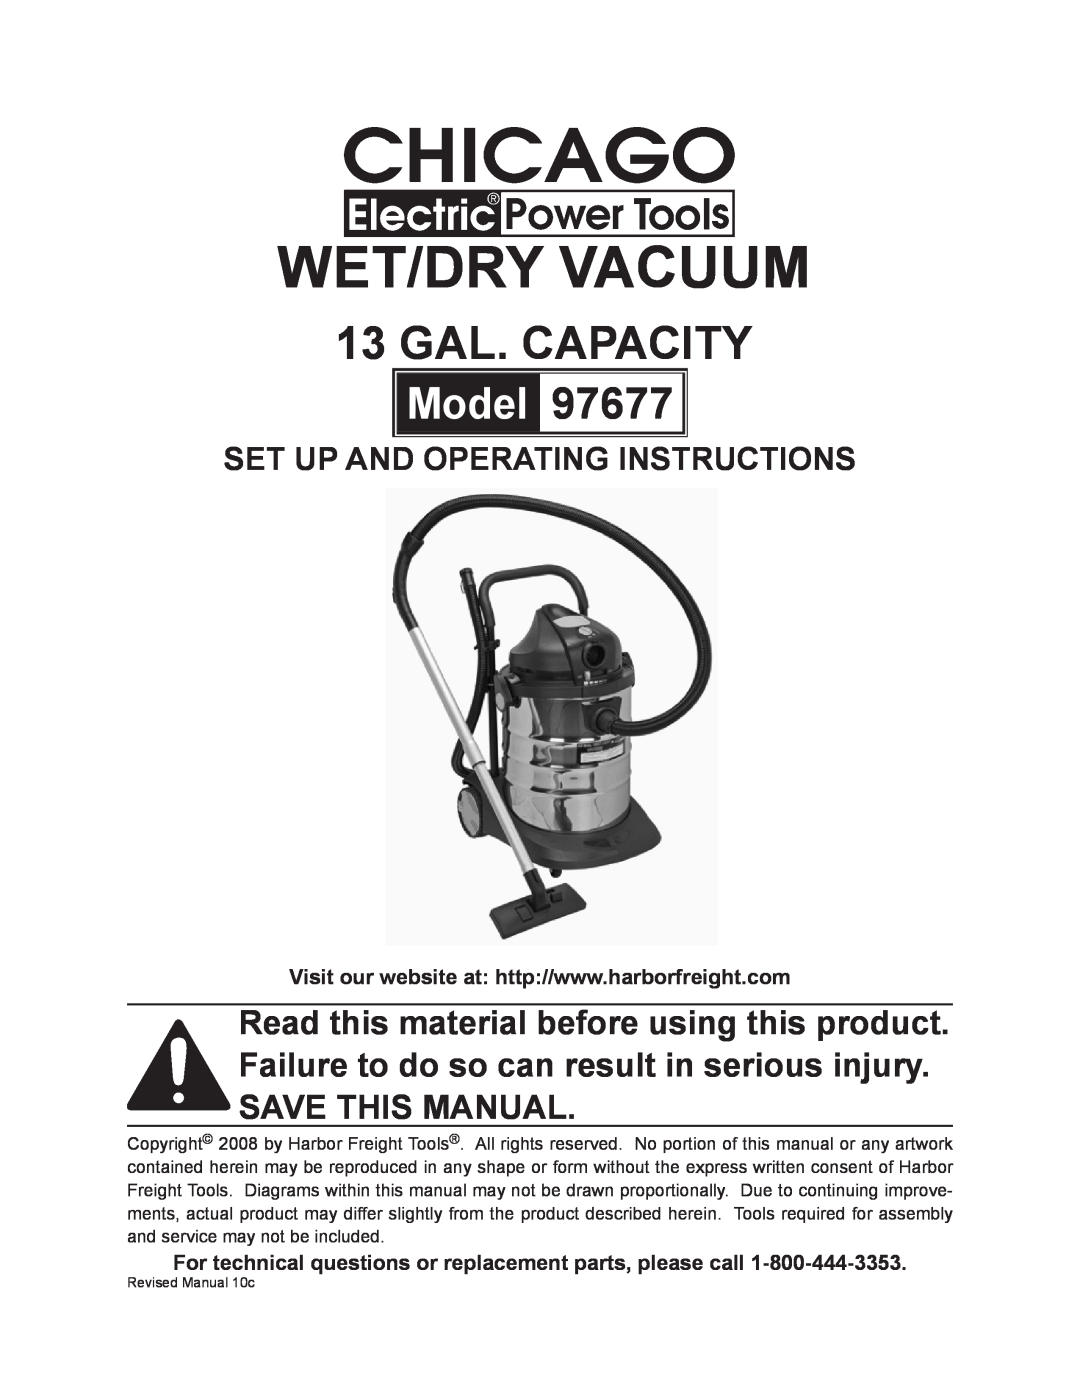 Chicago Electric 97677 manual Wet/Dry Vacuum, 13 GAL. CAPACITY, Model, Set up and Operating Instructions 